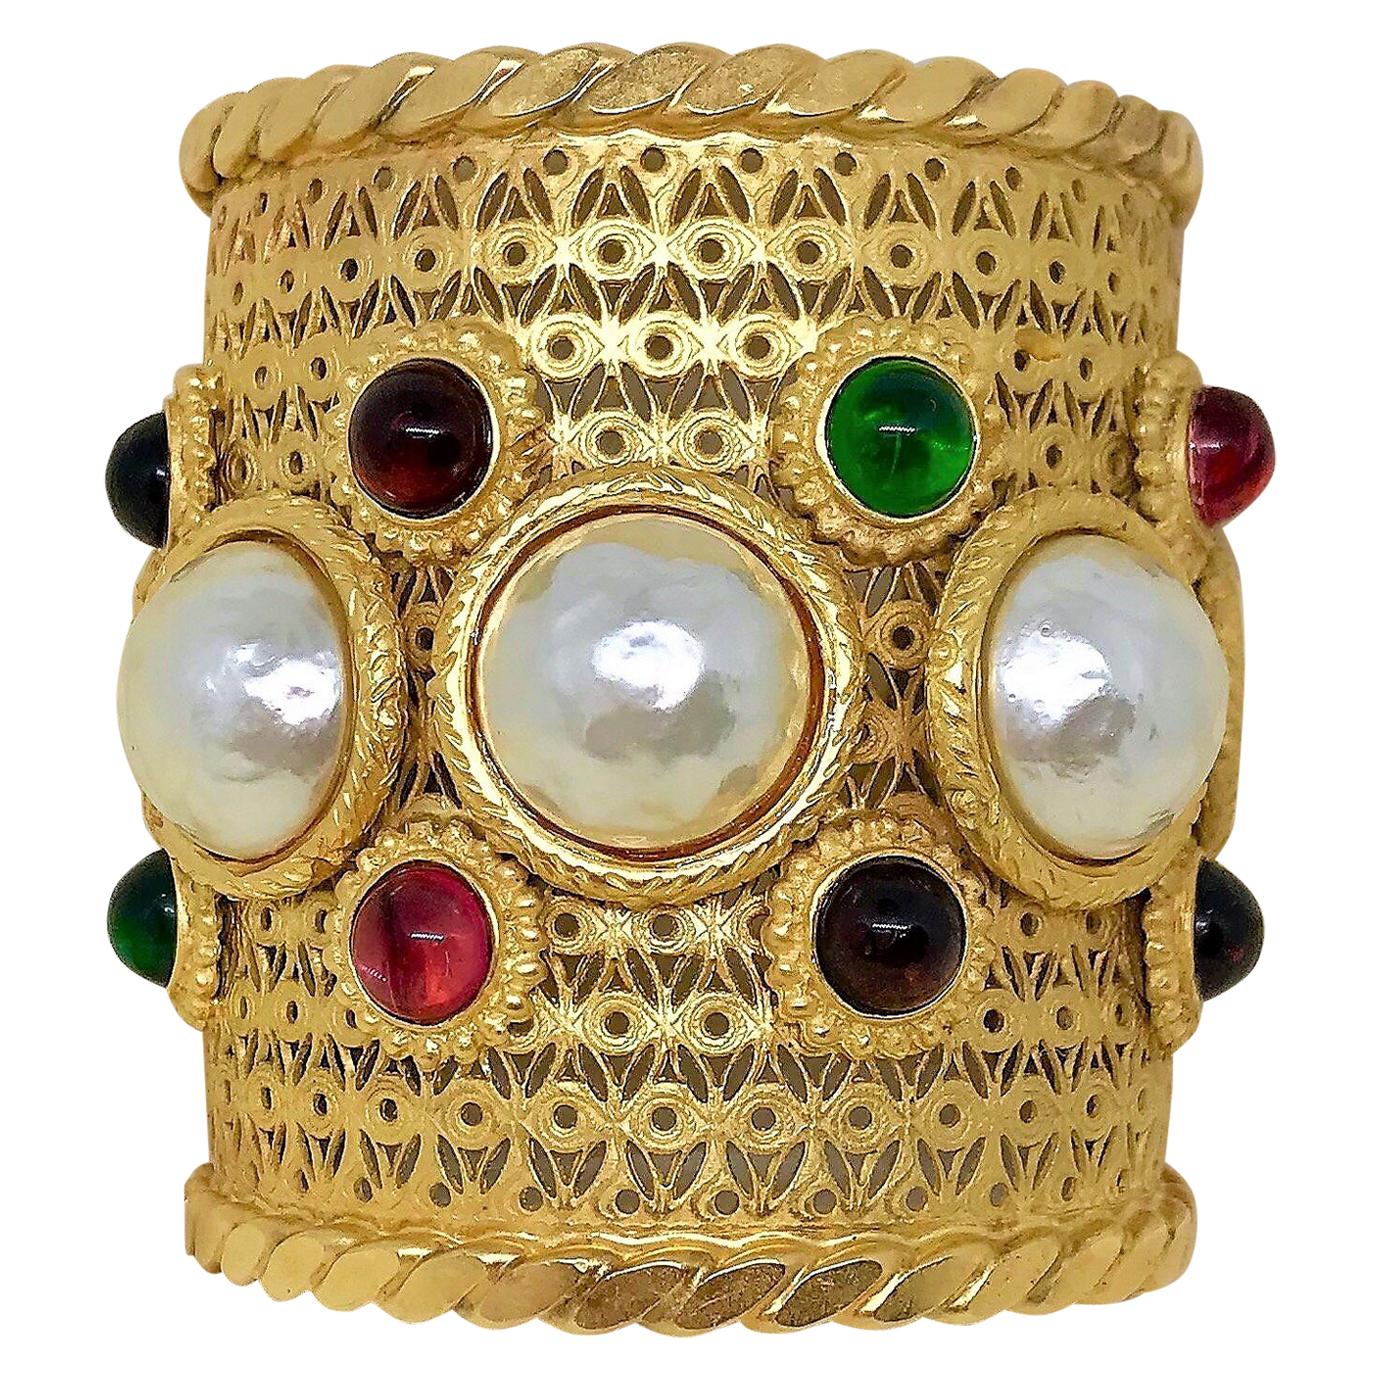 Circa 1980s Deanna Hamro Gold-Plated Faux-Pearl and  Cabochon Jeweled Cuff 